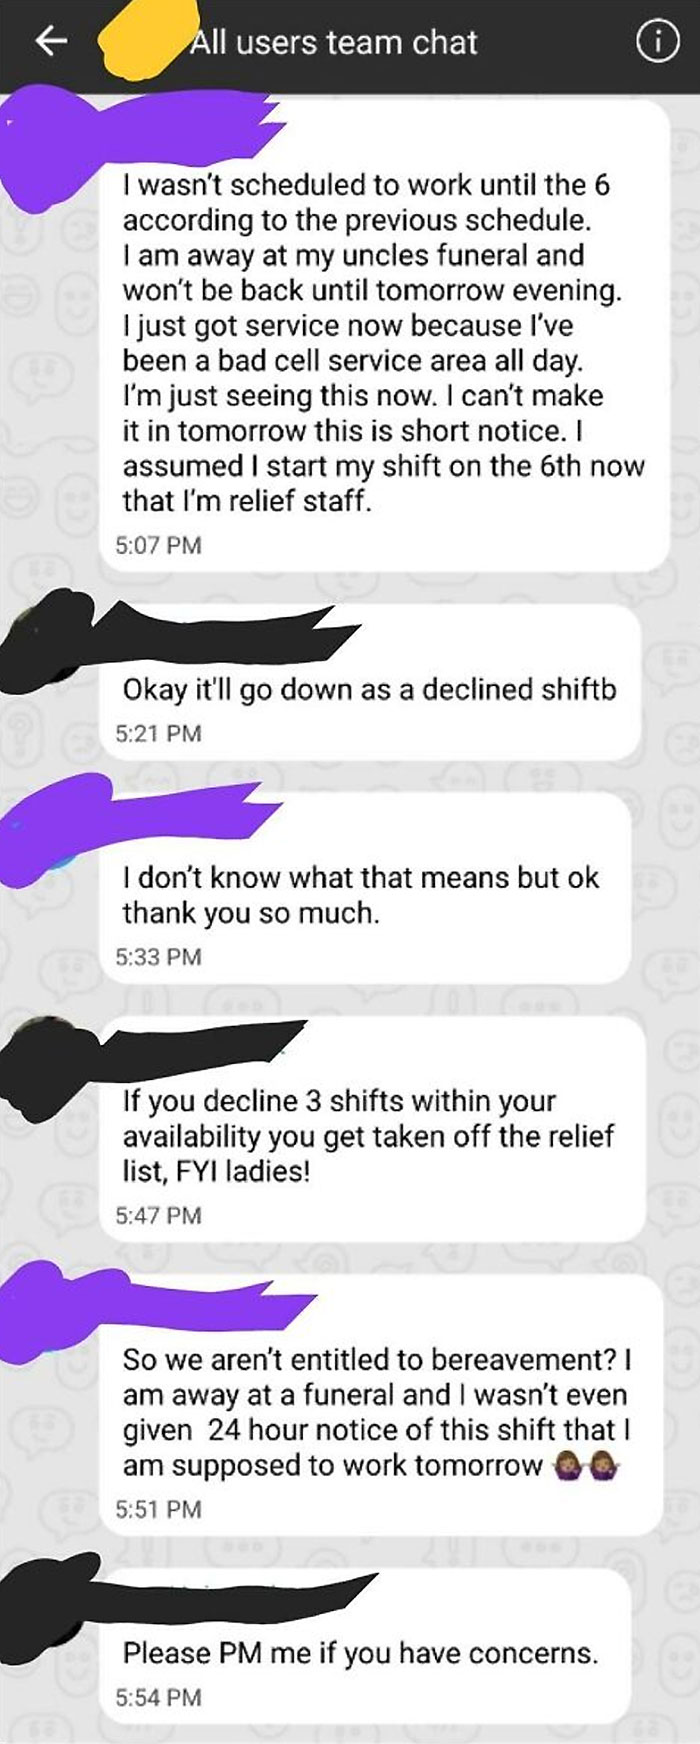 17 Hours Notice For A Shift While Out Of Town For A Funeral